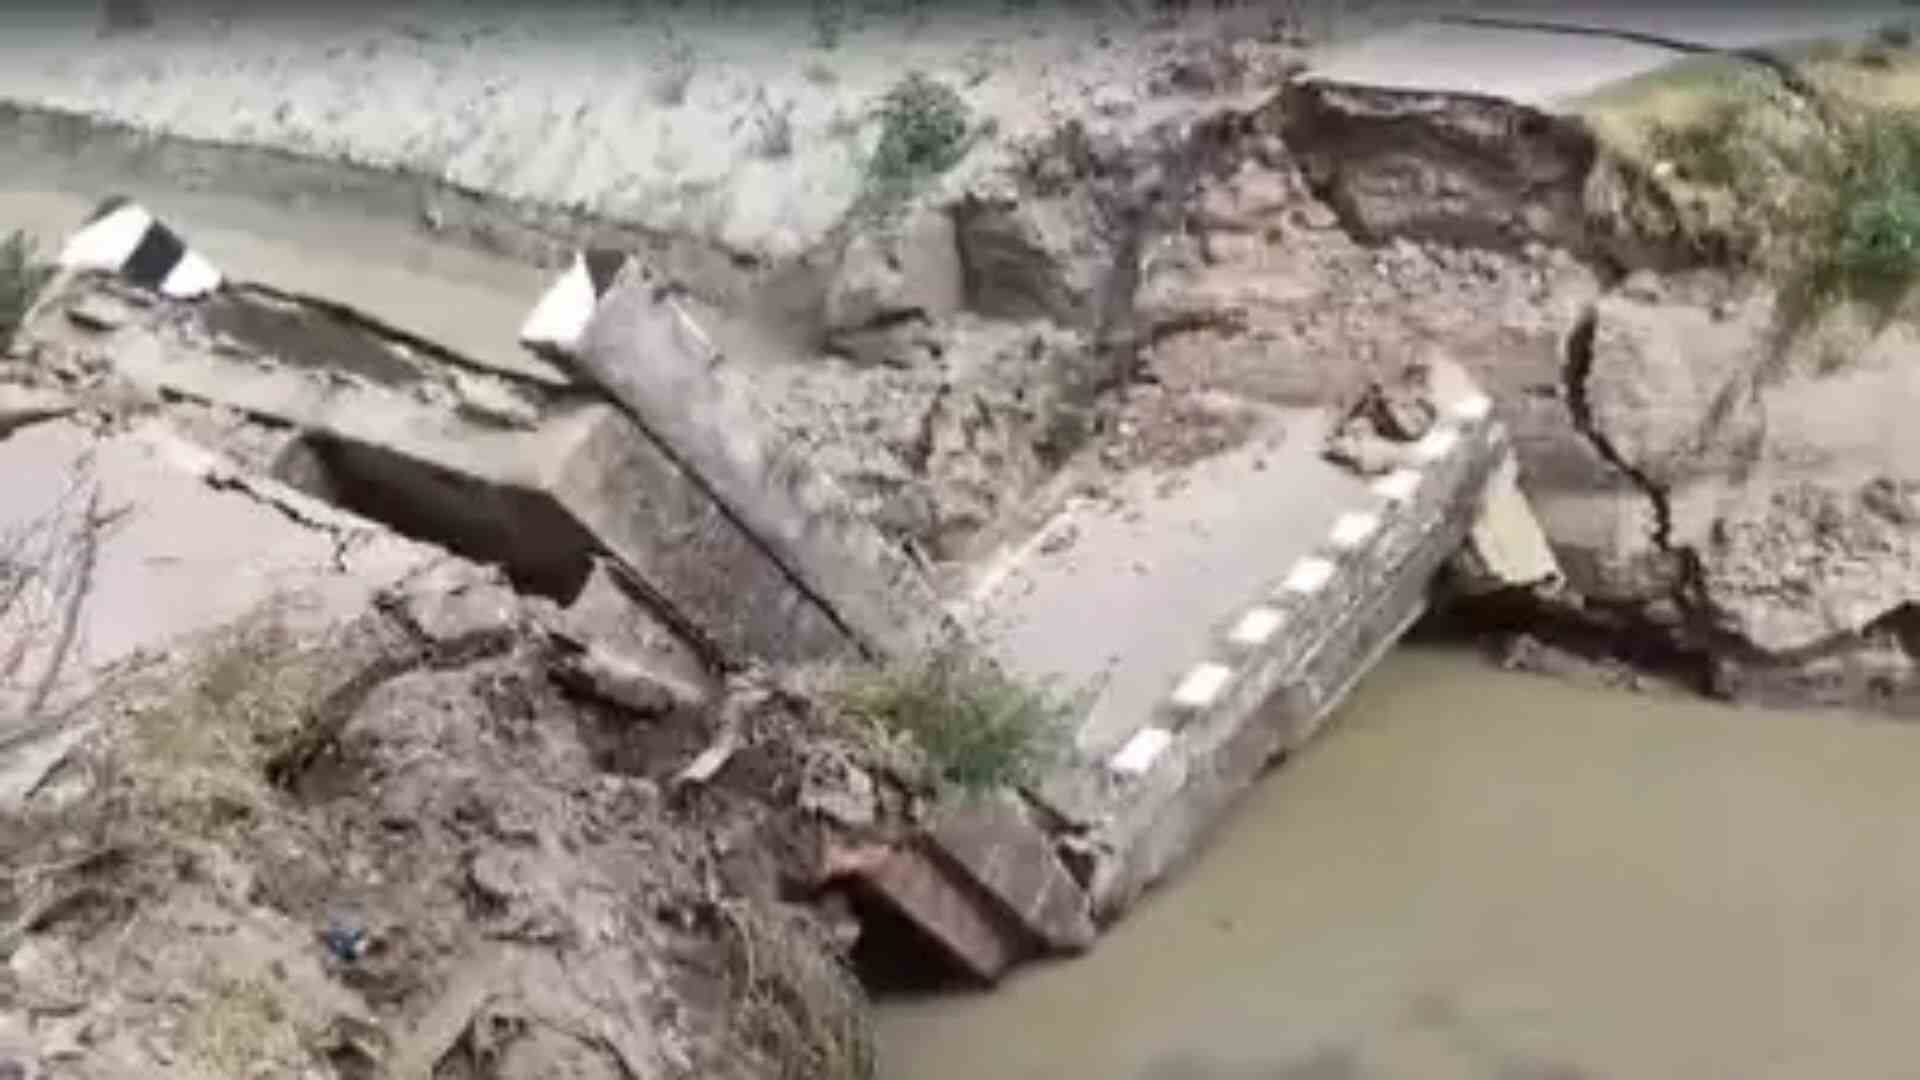 Watch: For The Second Time In A Week, Another Bridge Collapsed In Bihar